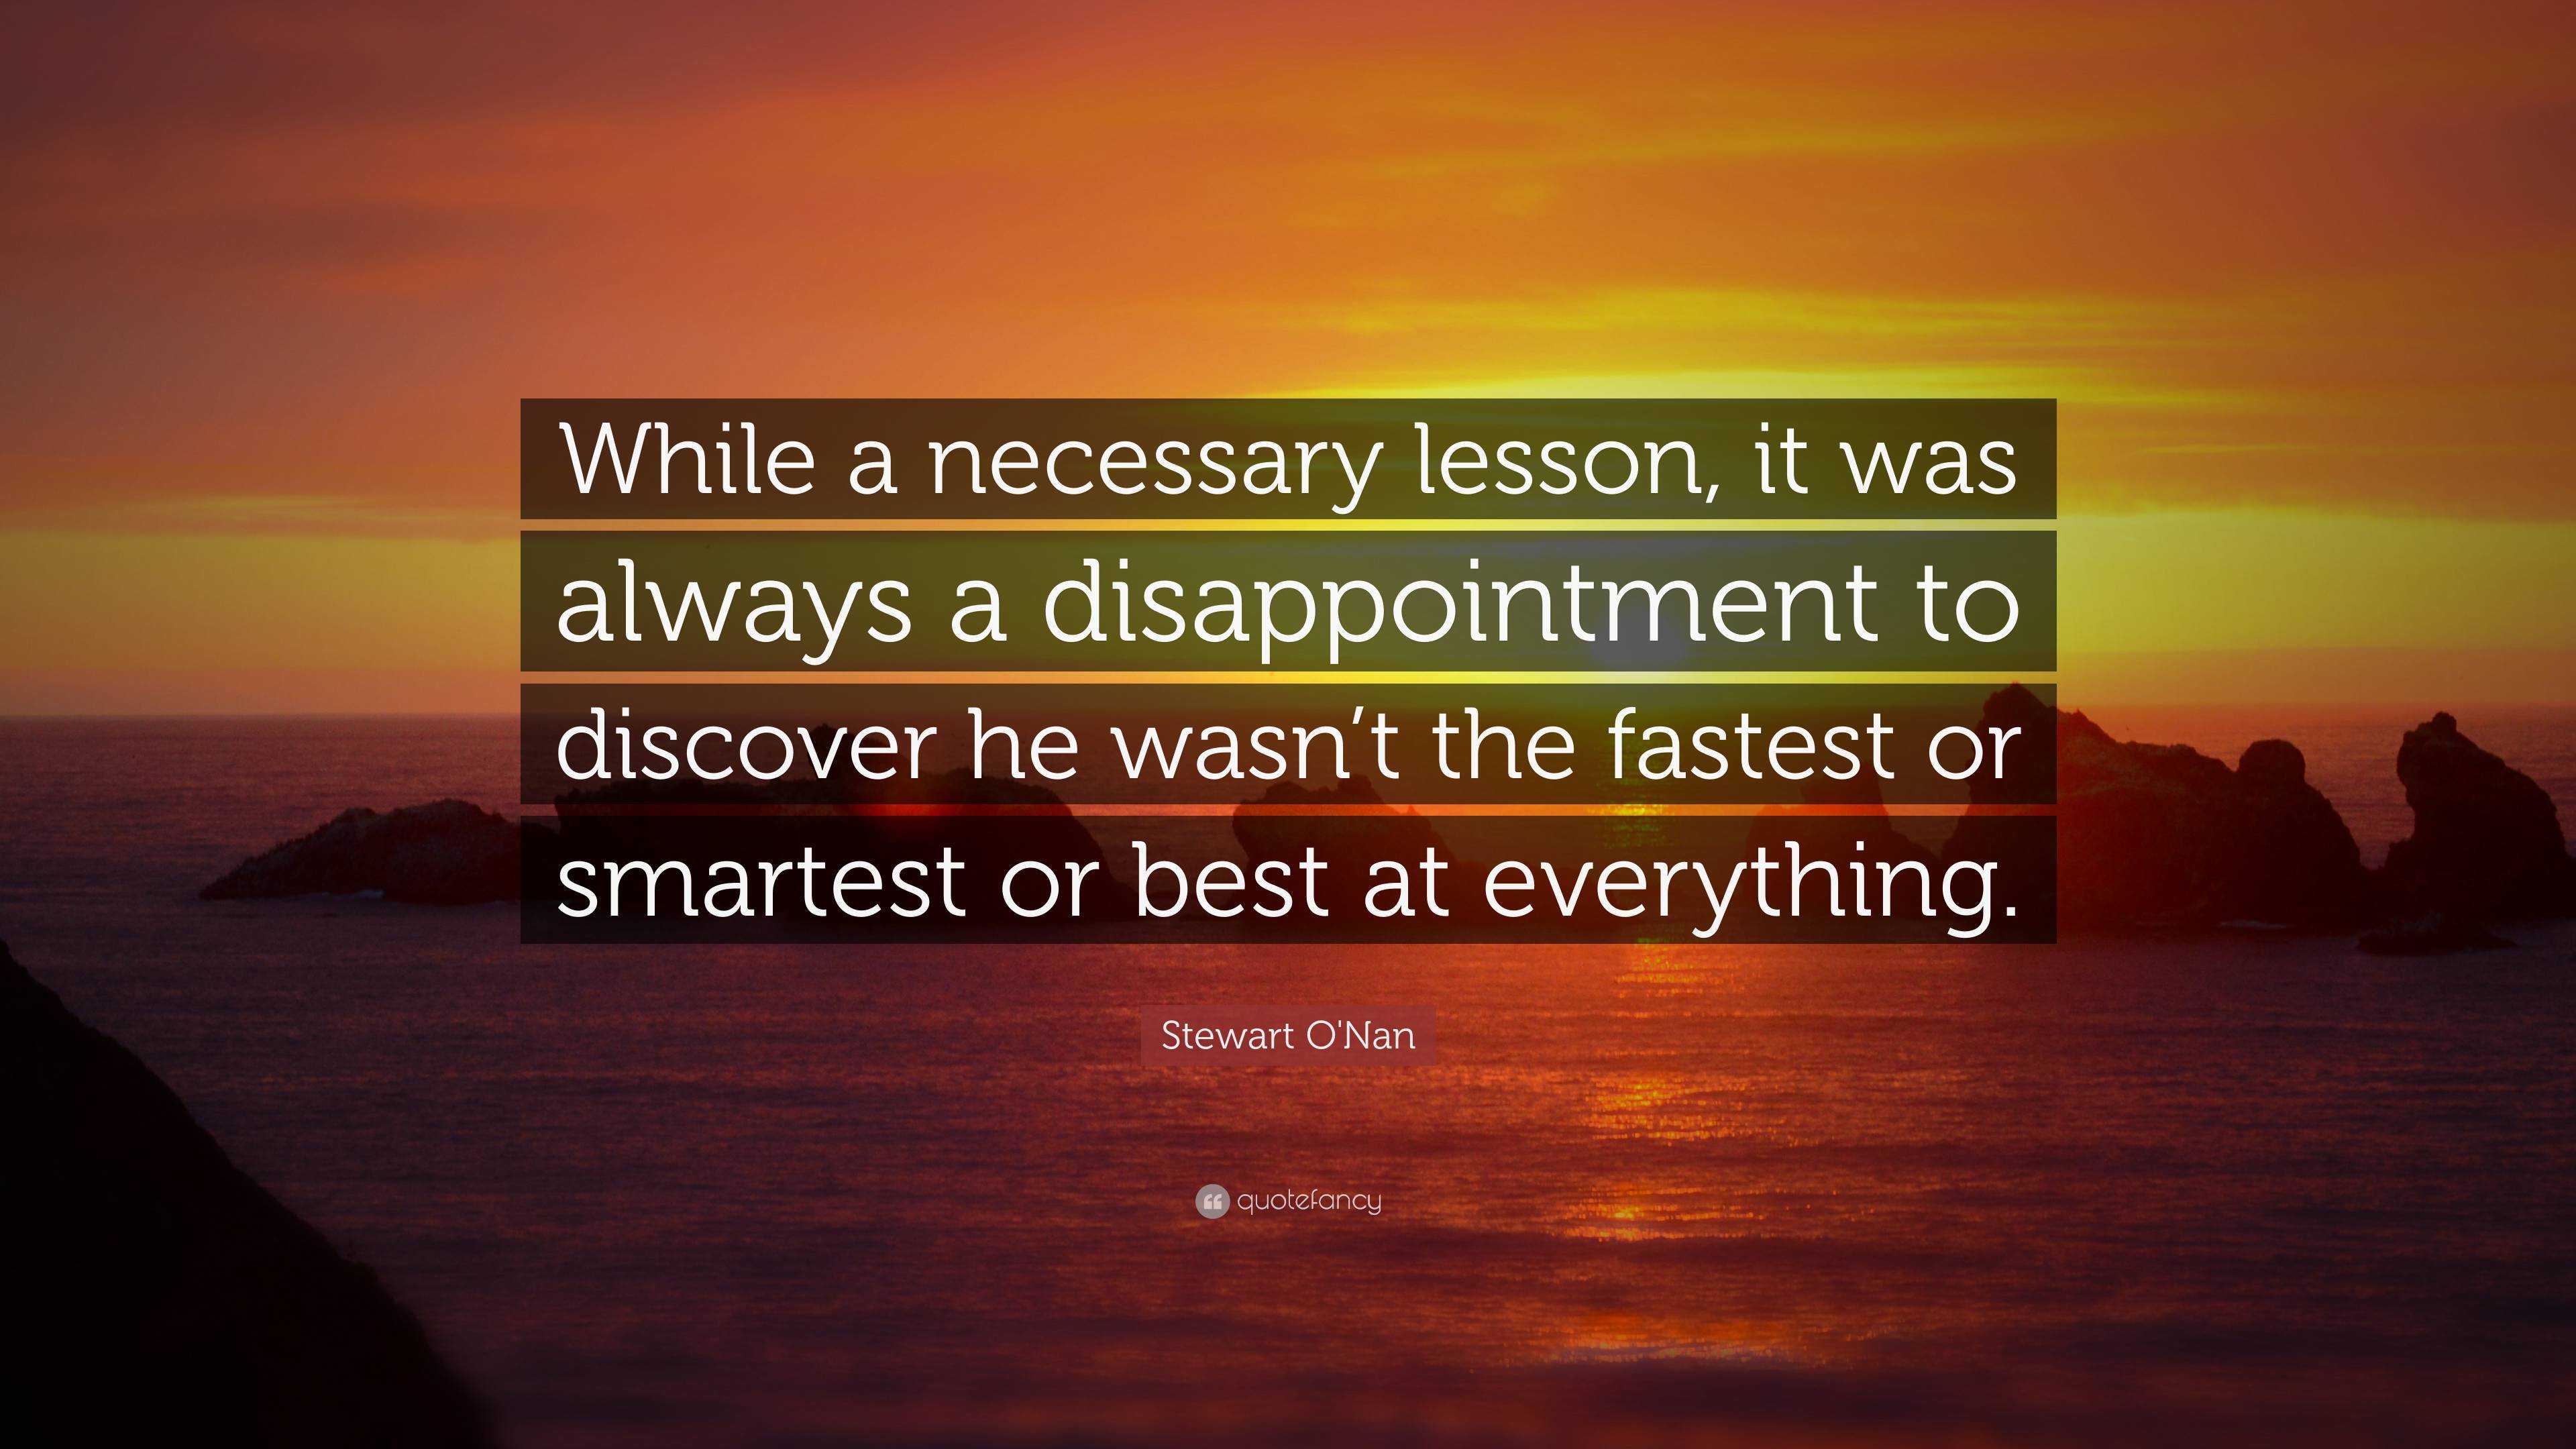 Stewart O'Nan Quote: “While a necessary lesson, it was always a ...